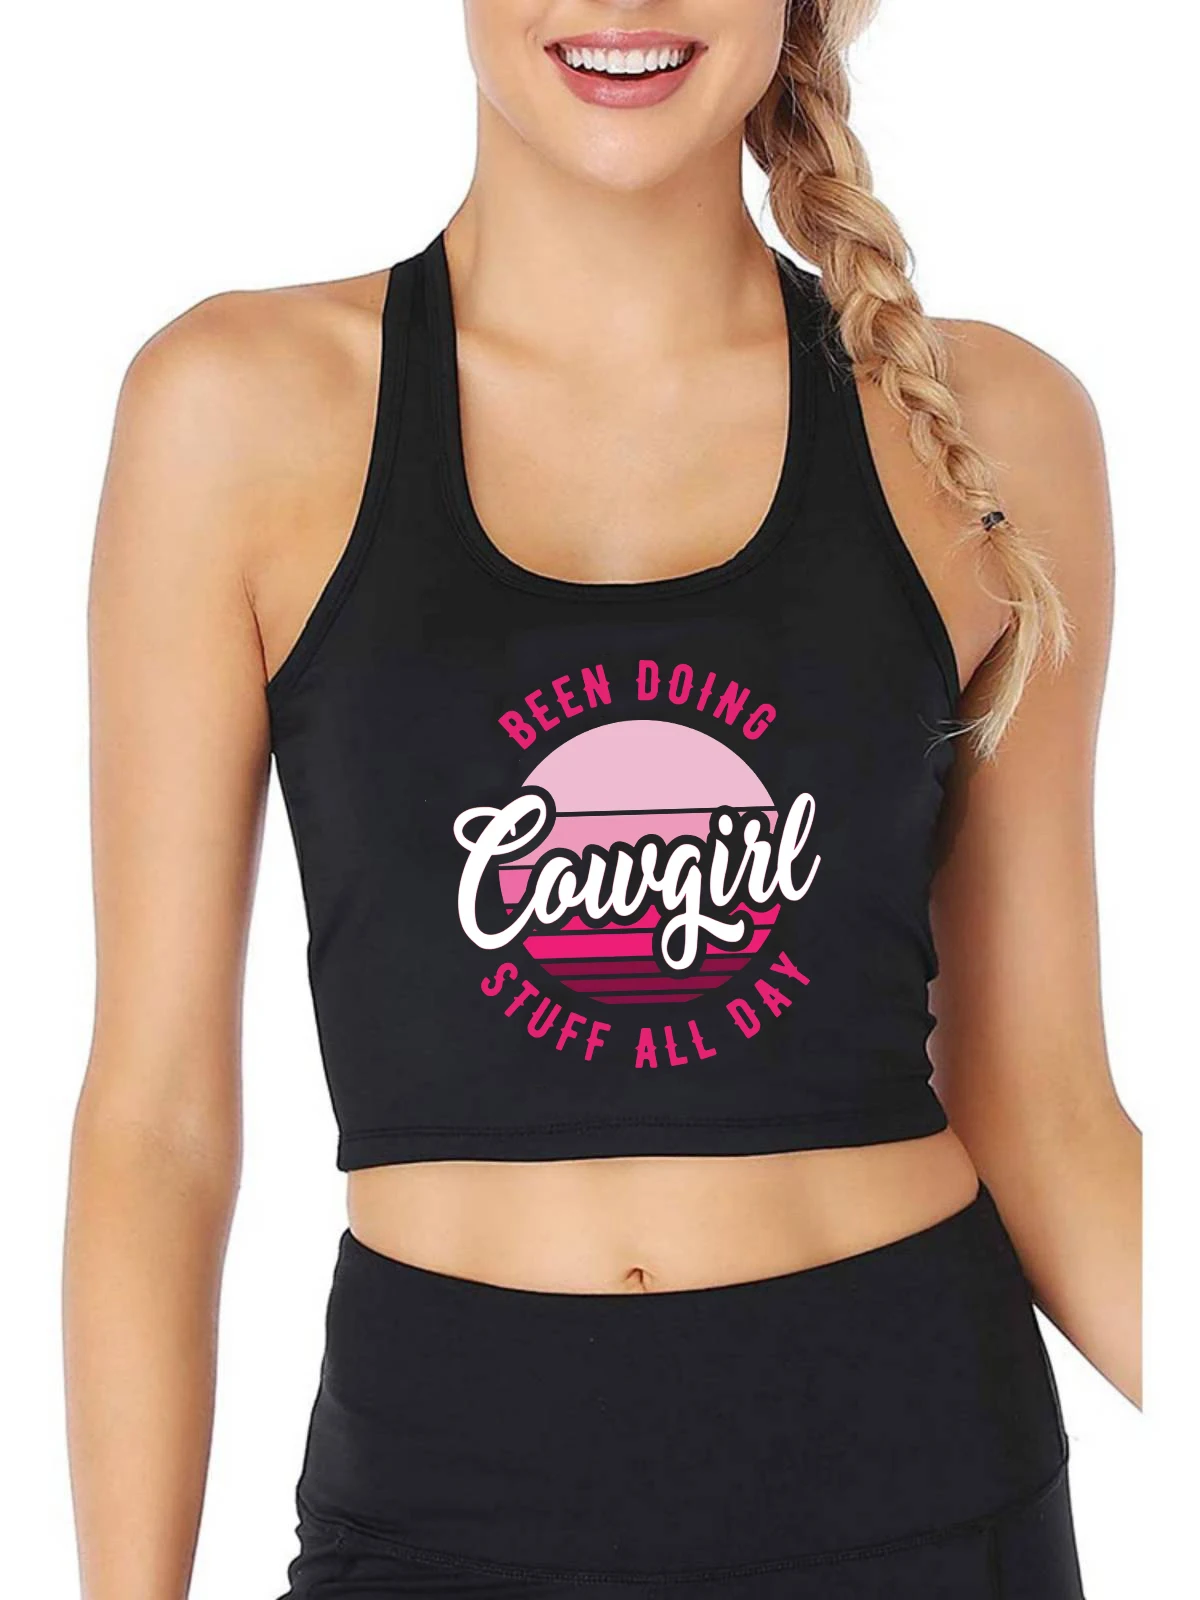 

Cowgirl Design Sexy Slim Fit Crop Top Western Cowgirl Casual Personalized Tank Tops Summer Camisole